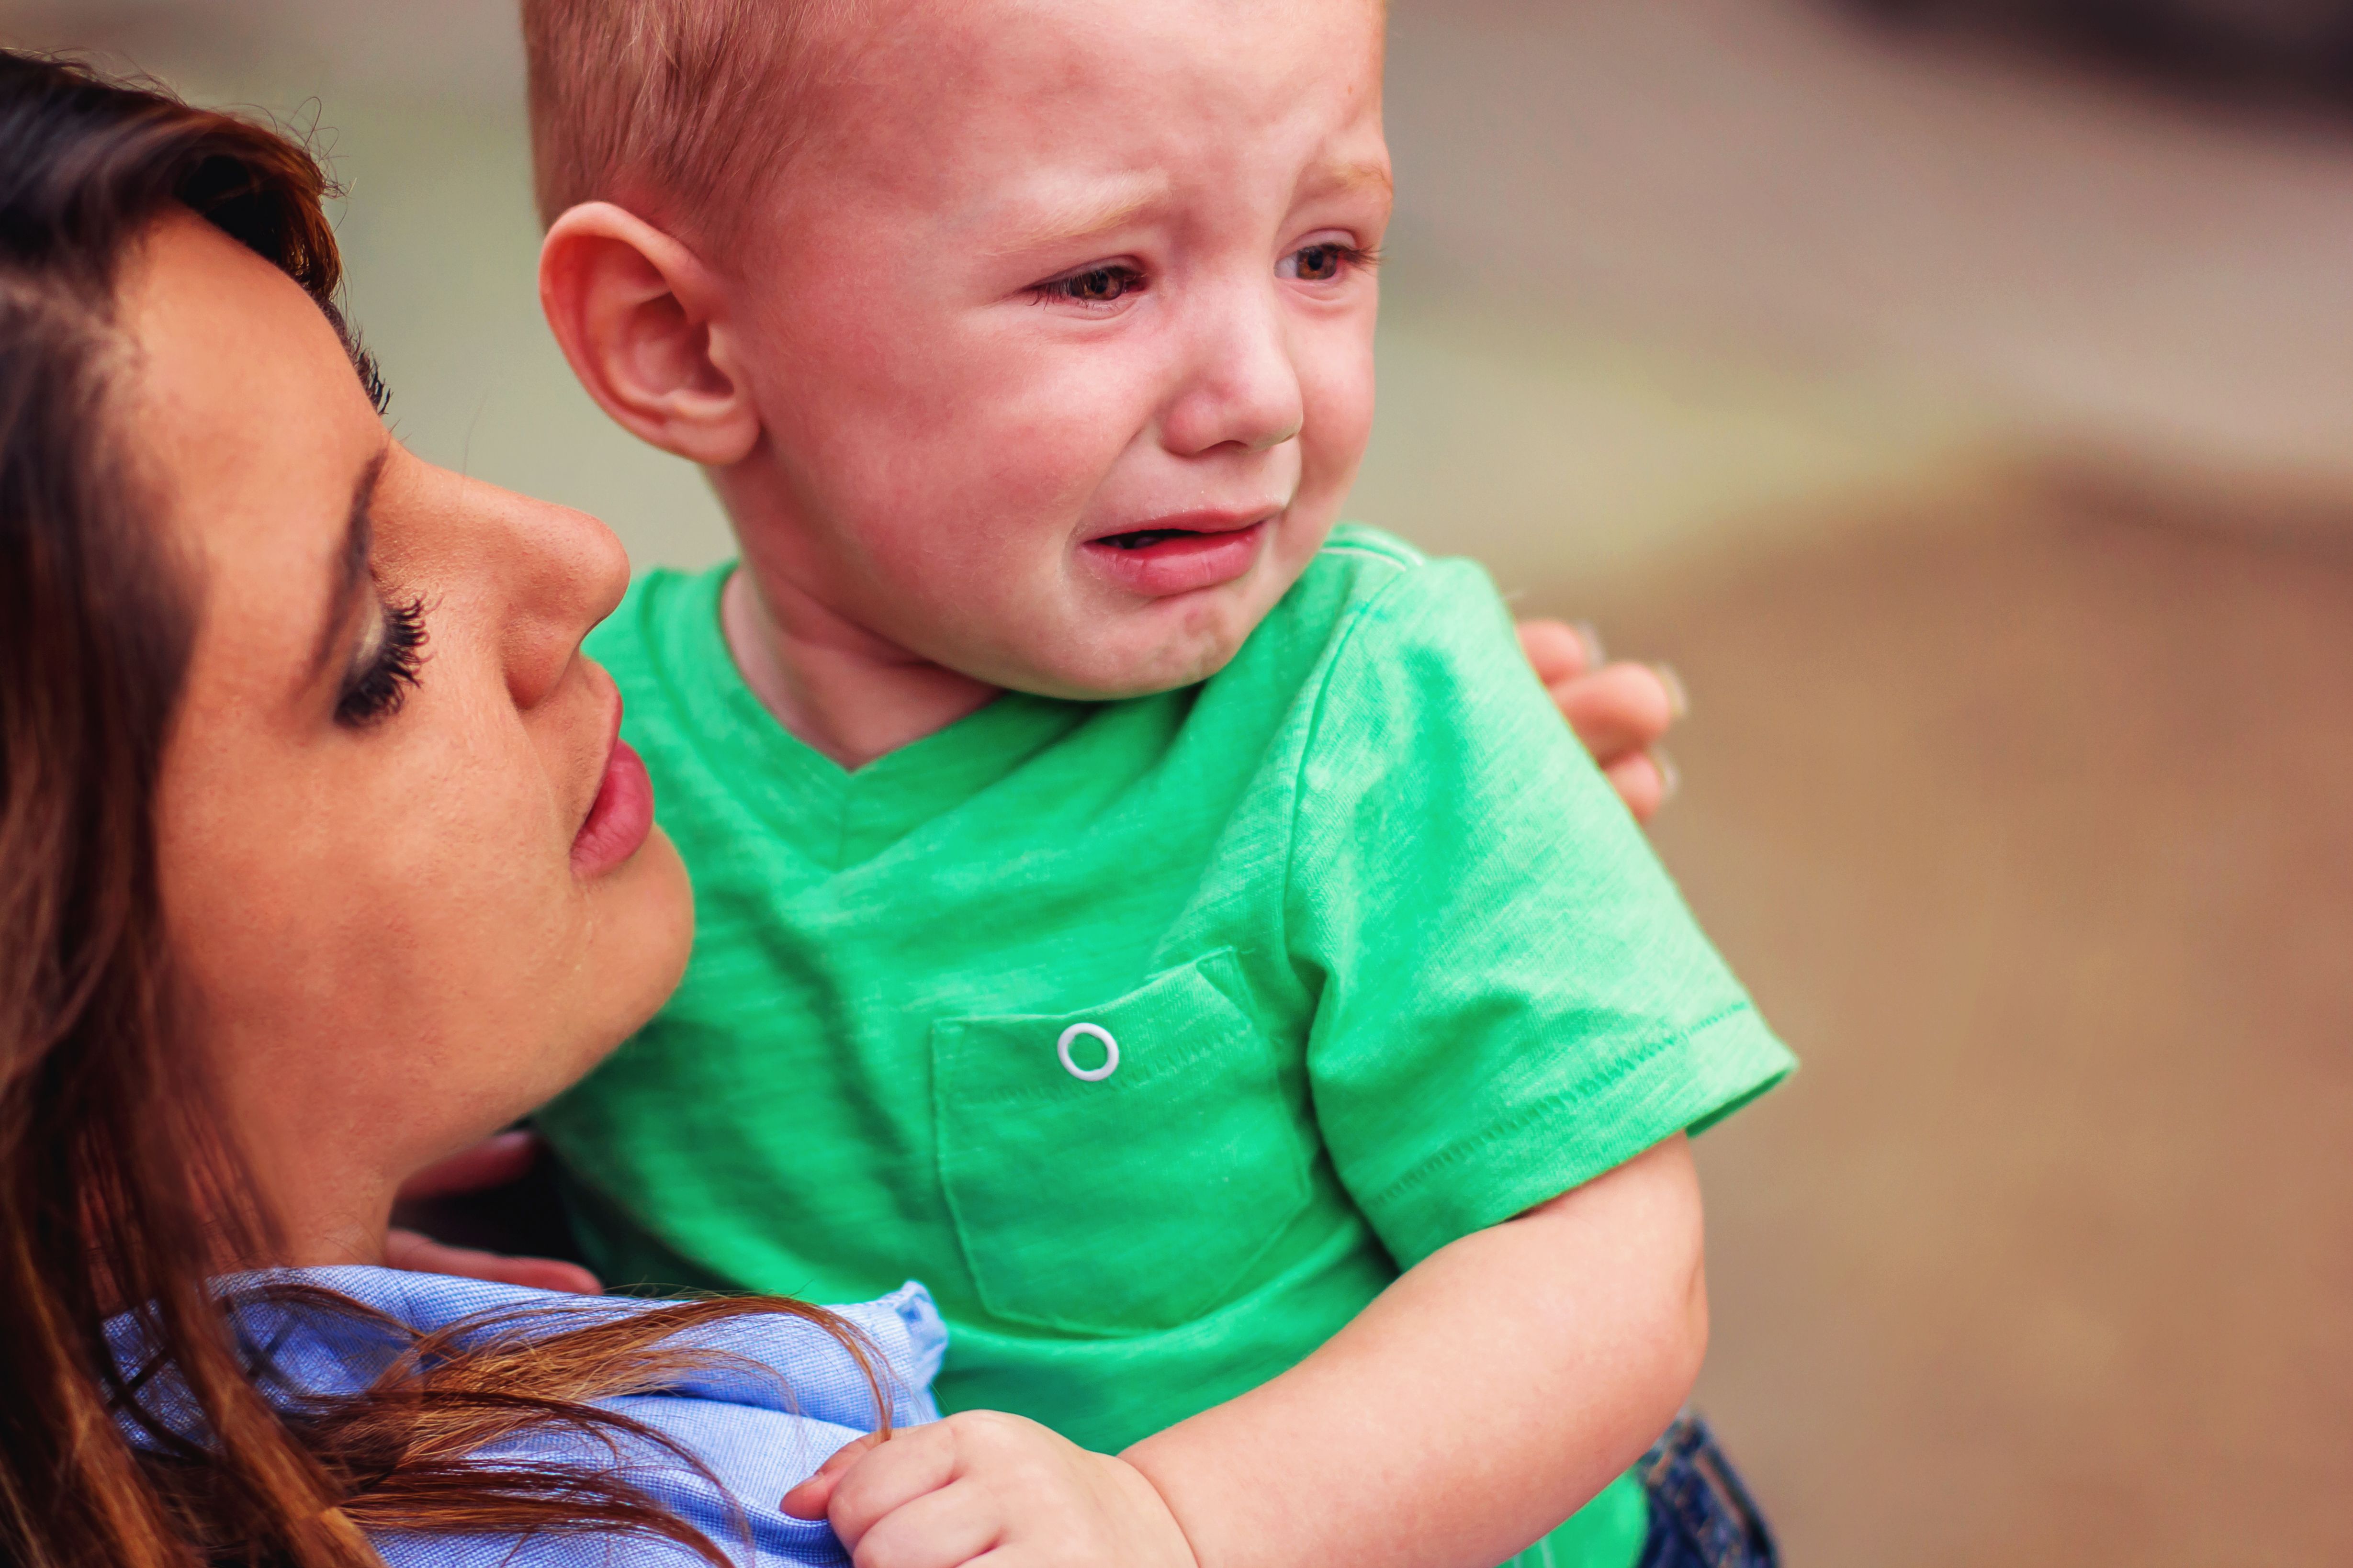 A toddler crying while being carried. | Source: Shutterstock